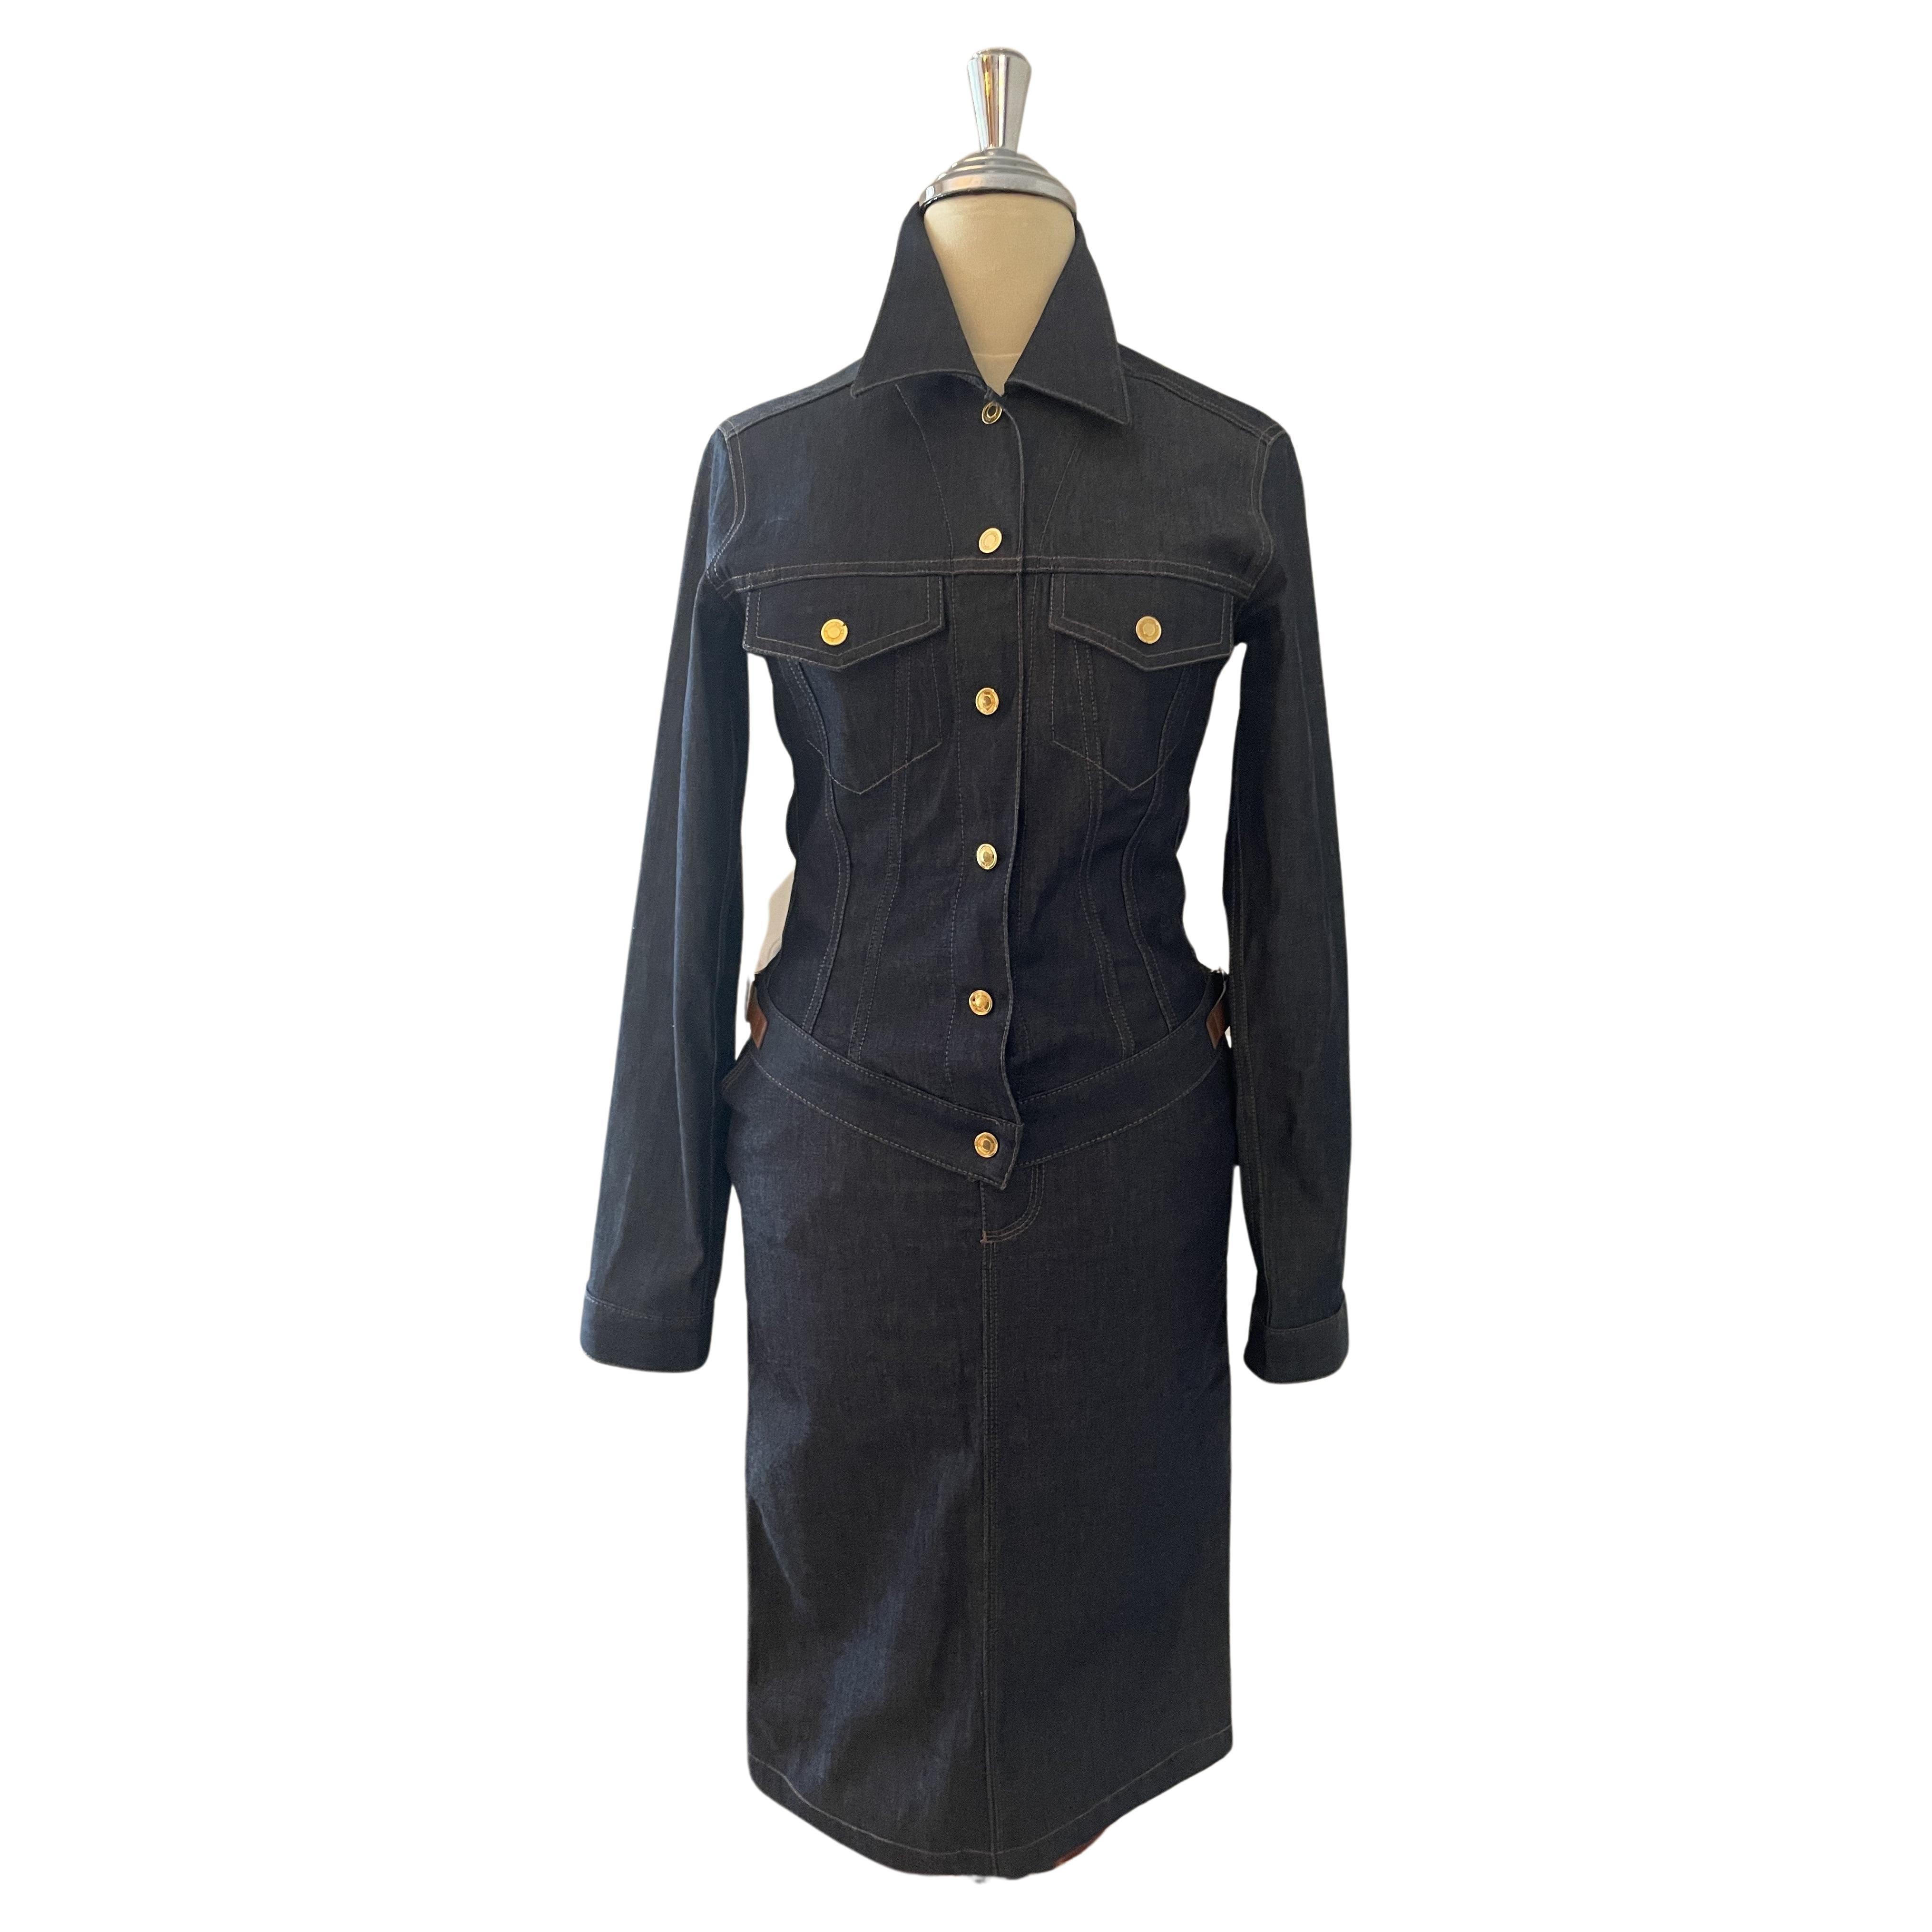 Set 1990s Tom Ford for Gucci denim jacket and skirt, Runway 1999 collectors item For Sale